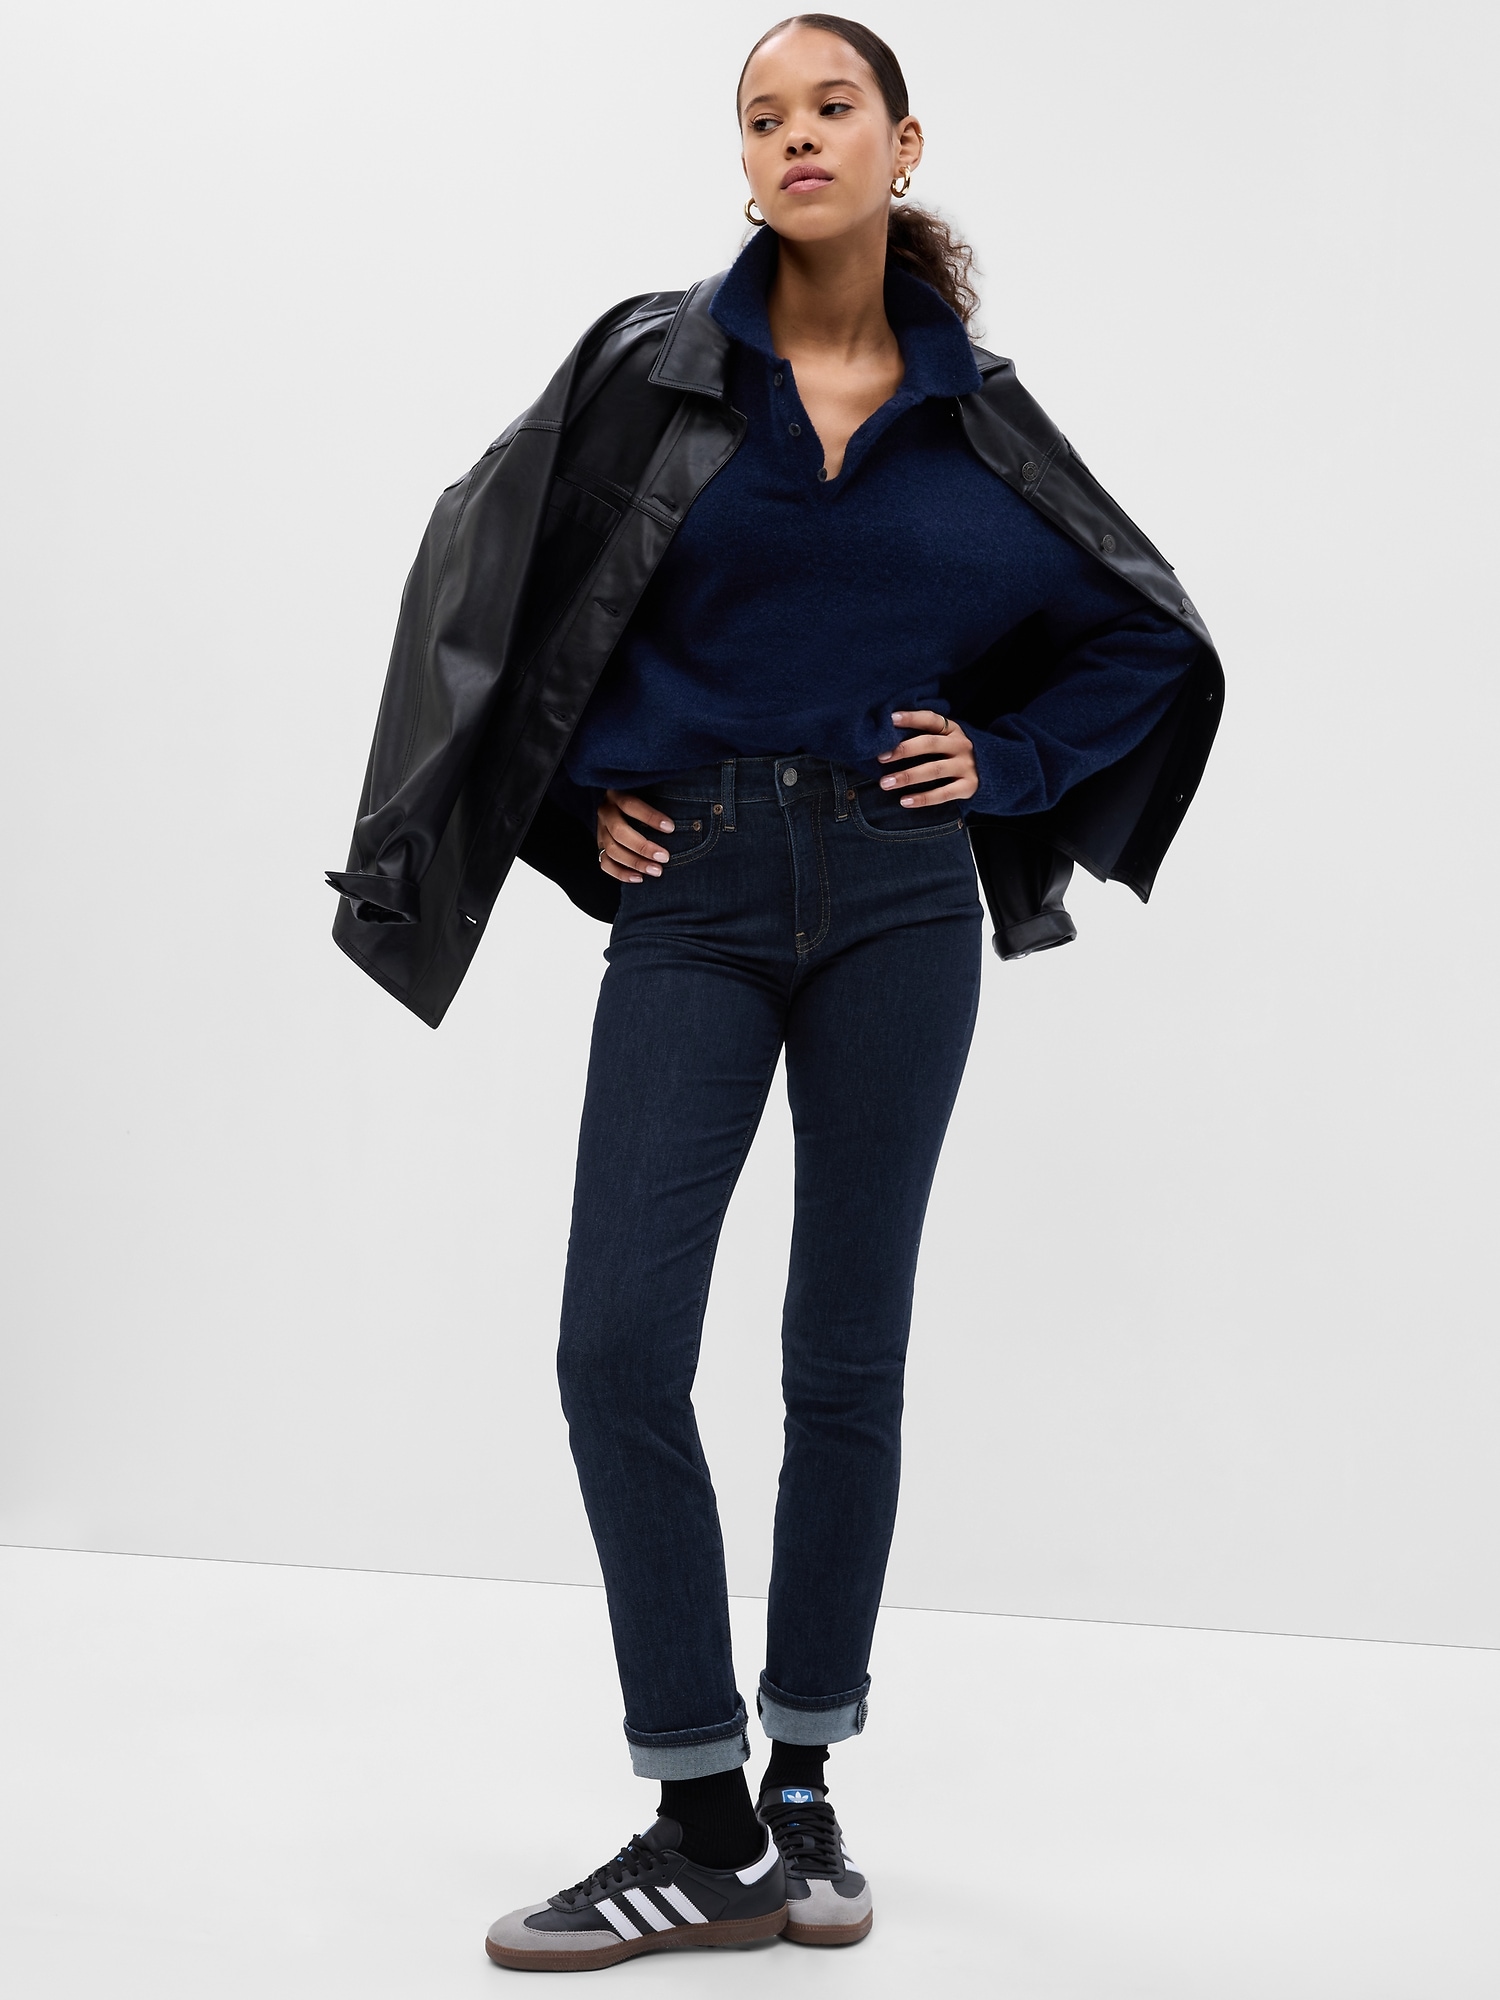 Essential Black Jeans: Gap High Rise Flare Jeans, Yes, Flare Jeans Are  Back, but This Time, They've Got an Edge